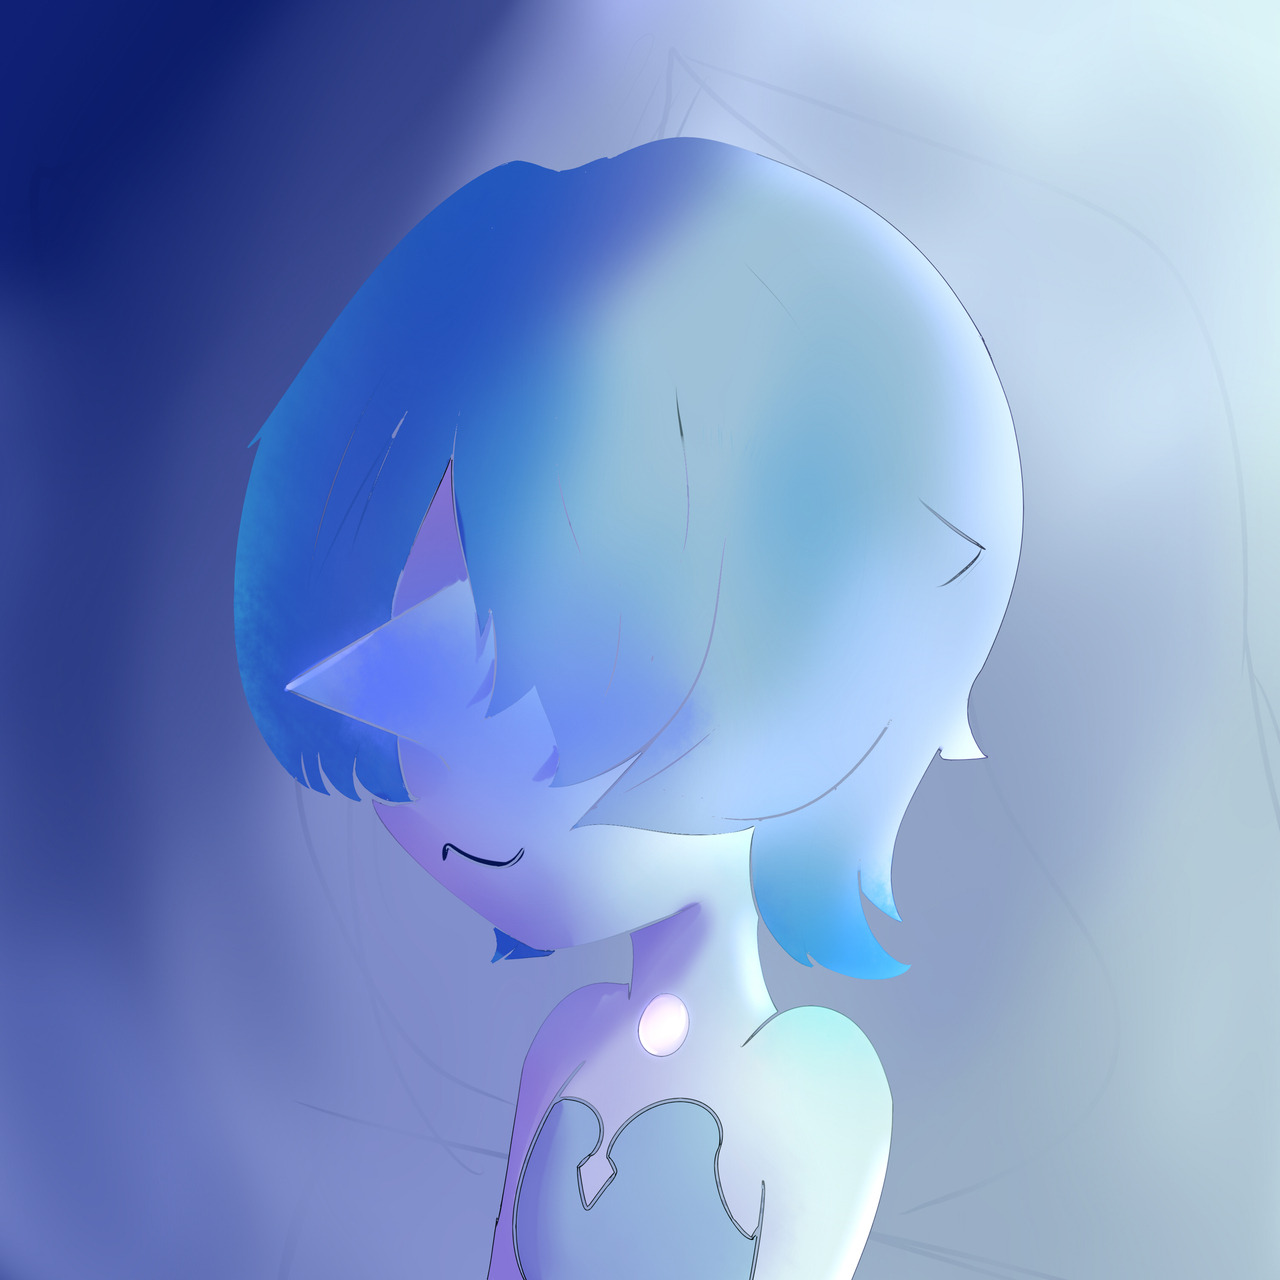 MAde a Pearl a blue one in particular a lot of thigns went wrong but I still just went with it oh well